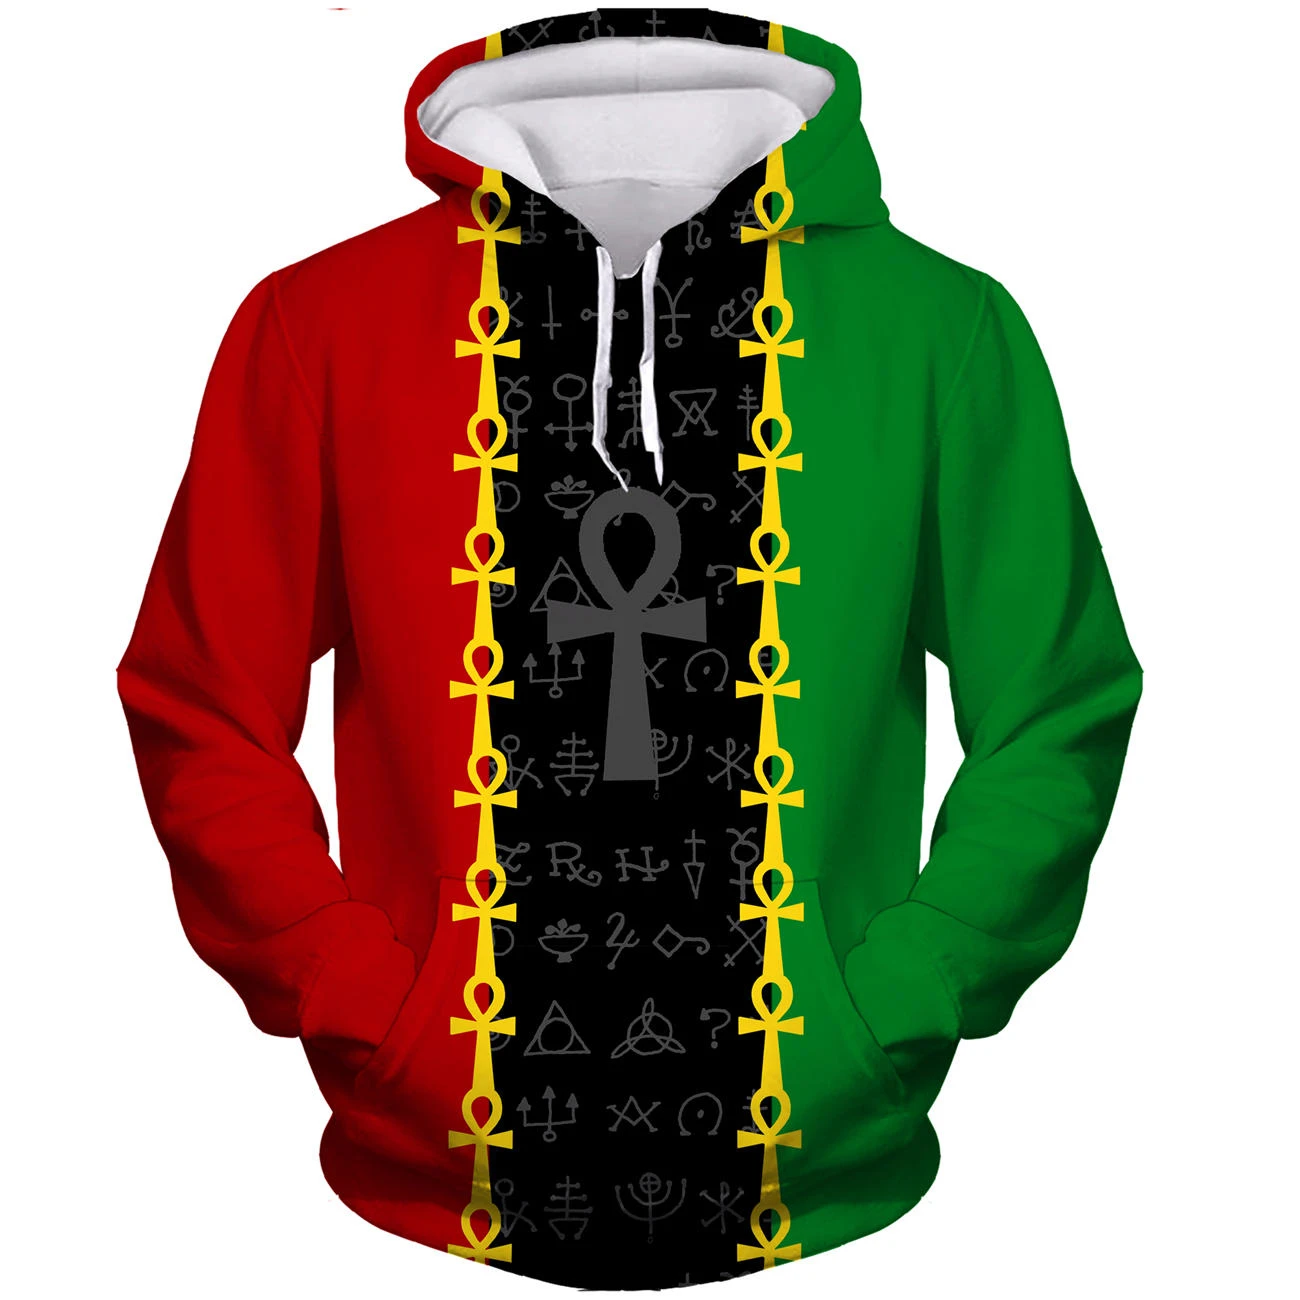 Fashion 3D Print Hoodies Egyptian Cultural Symbols Casual Long Sleeved Pullover Sweatshirts